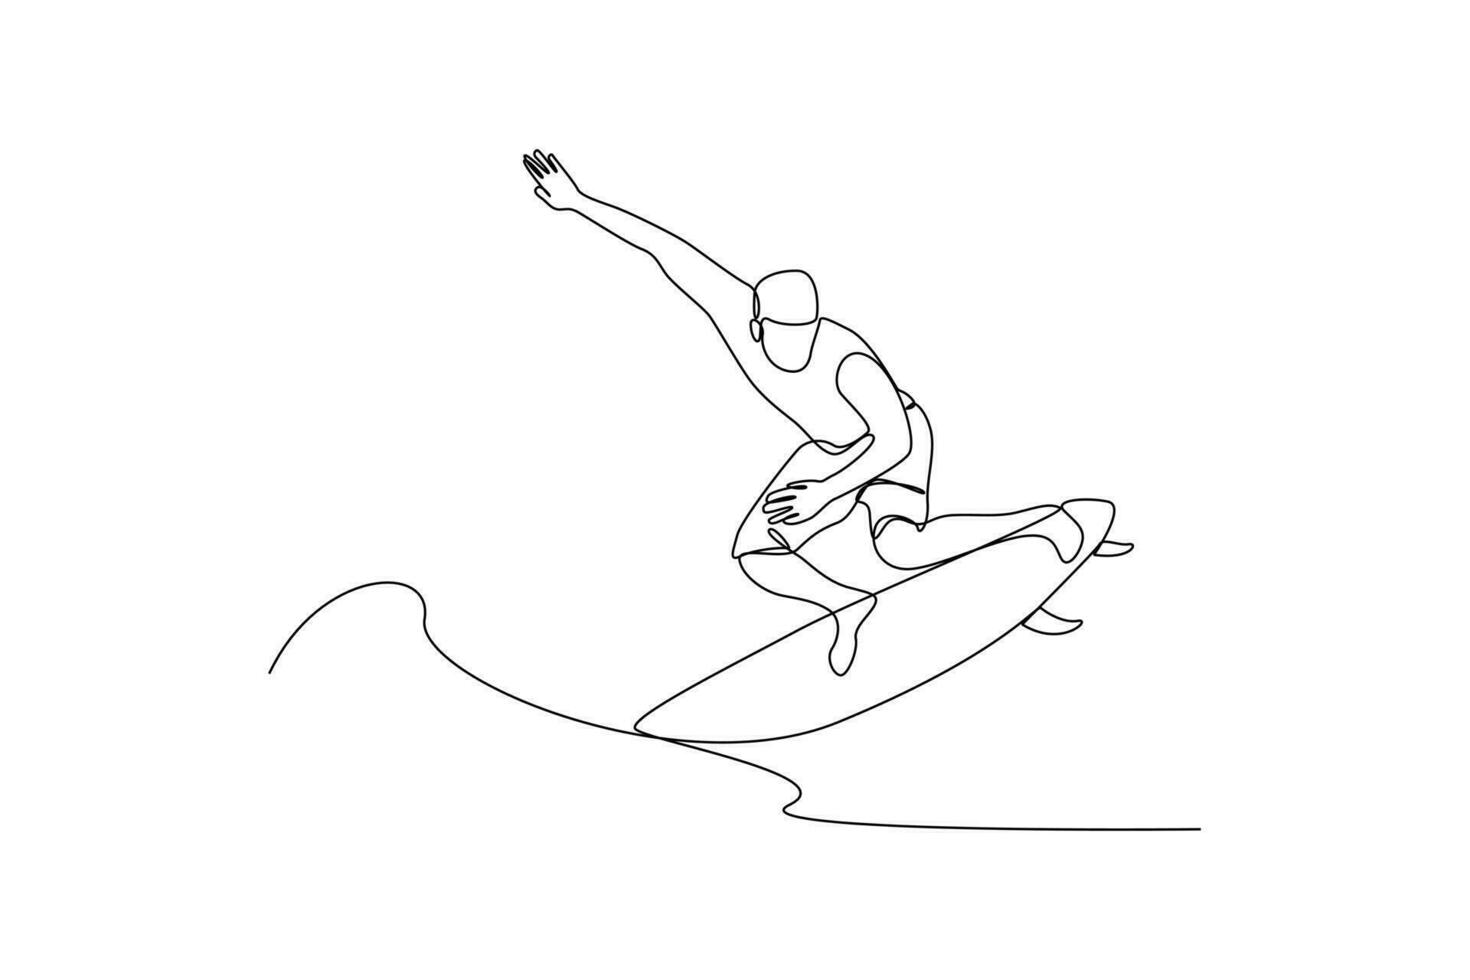 Continuous one-line drawing man jumping surfing on the waves. Class it up concept. Single line drawing design graphic vector illustration